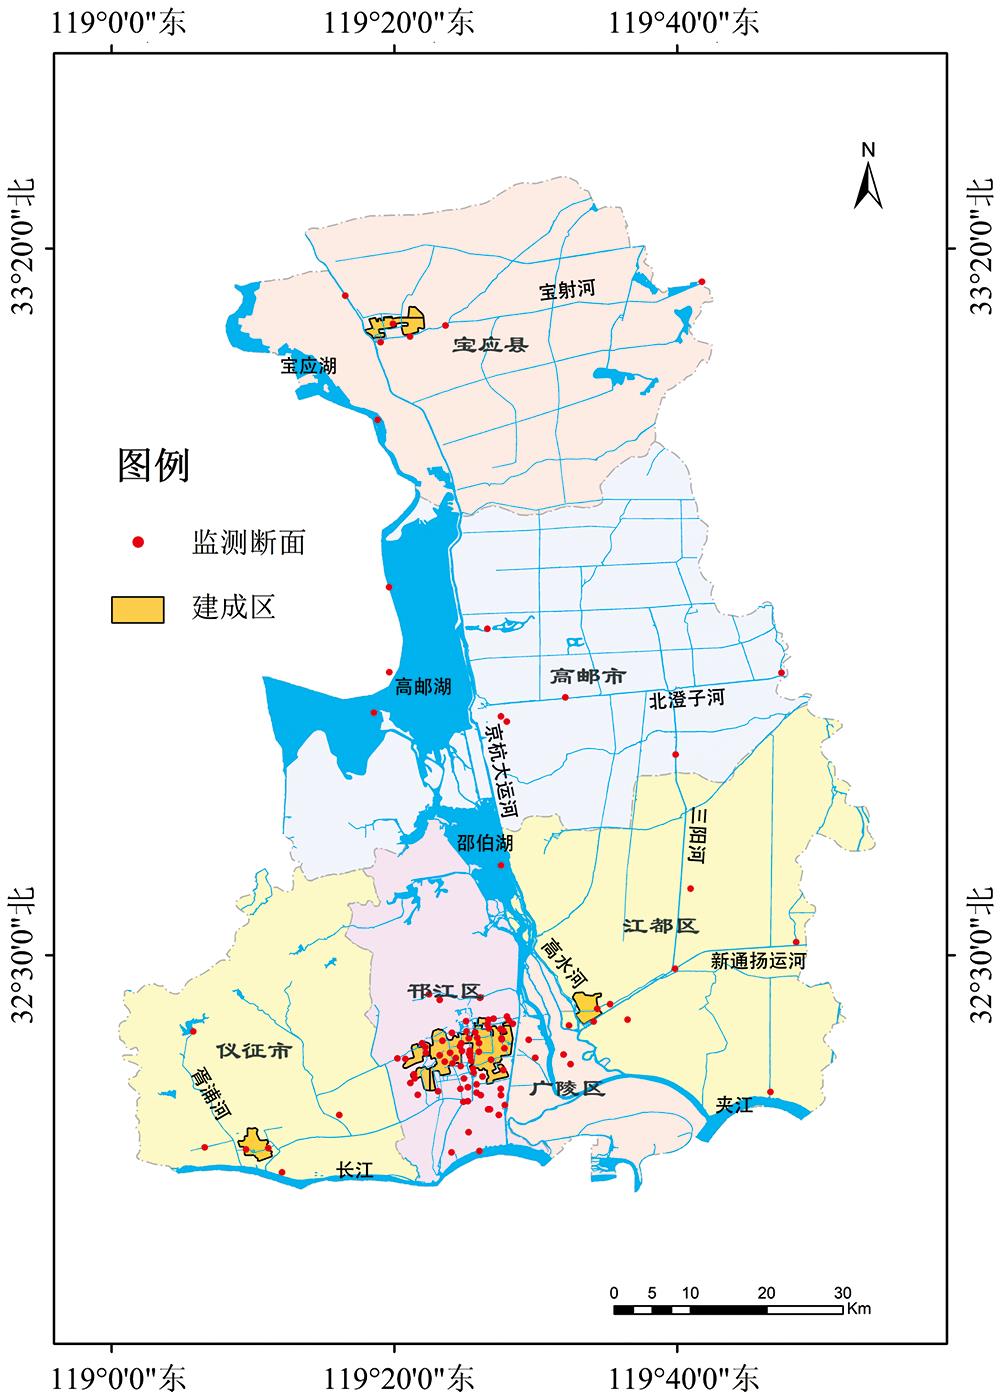 Distribution of water quality monitoring sections